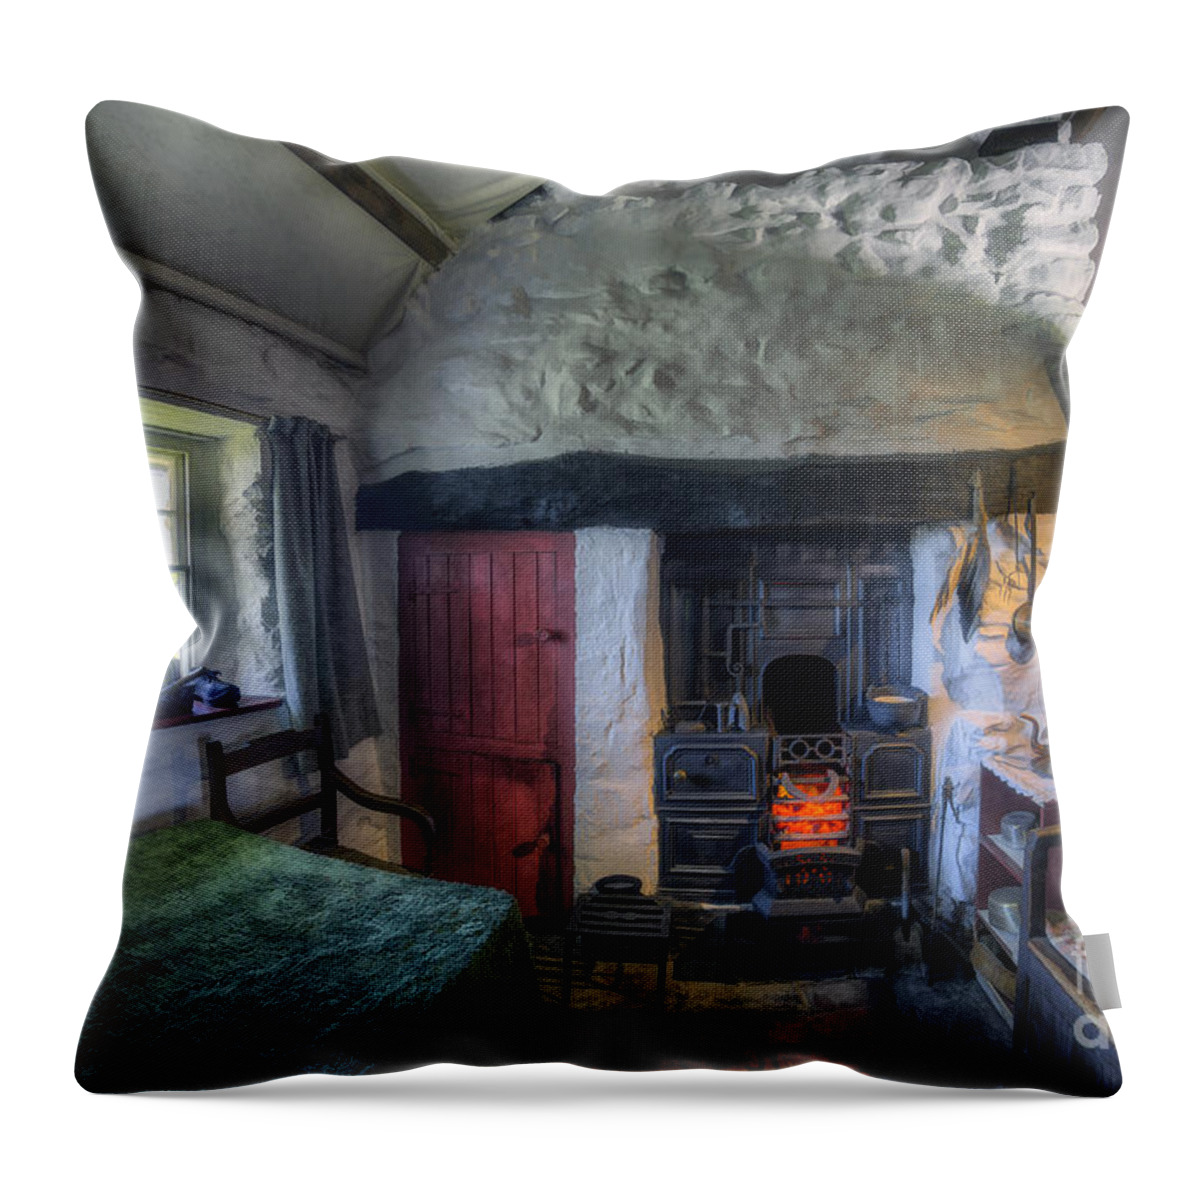 Grandmother Throw Pillow featuring the photograph Olde Country Home by Ian Mitchell